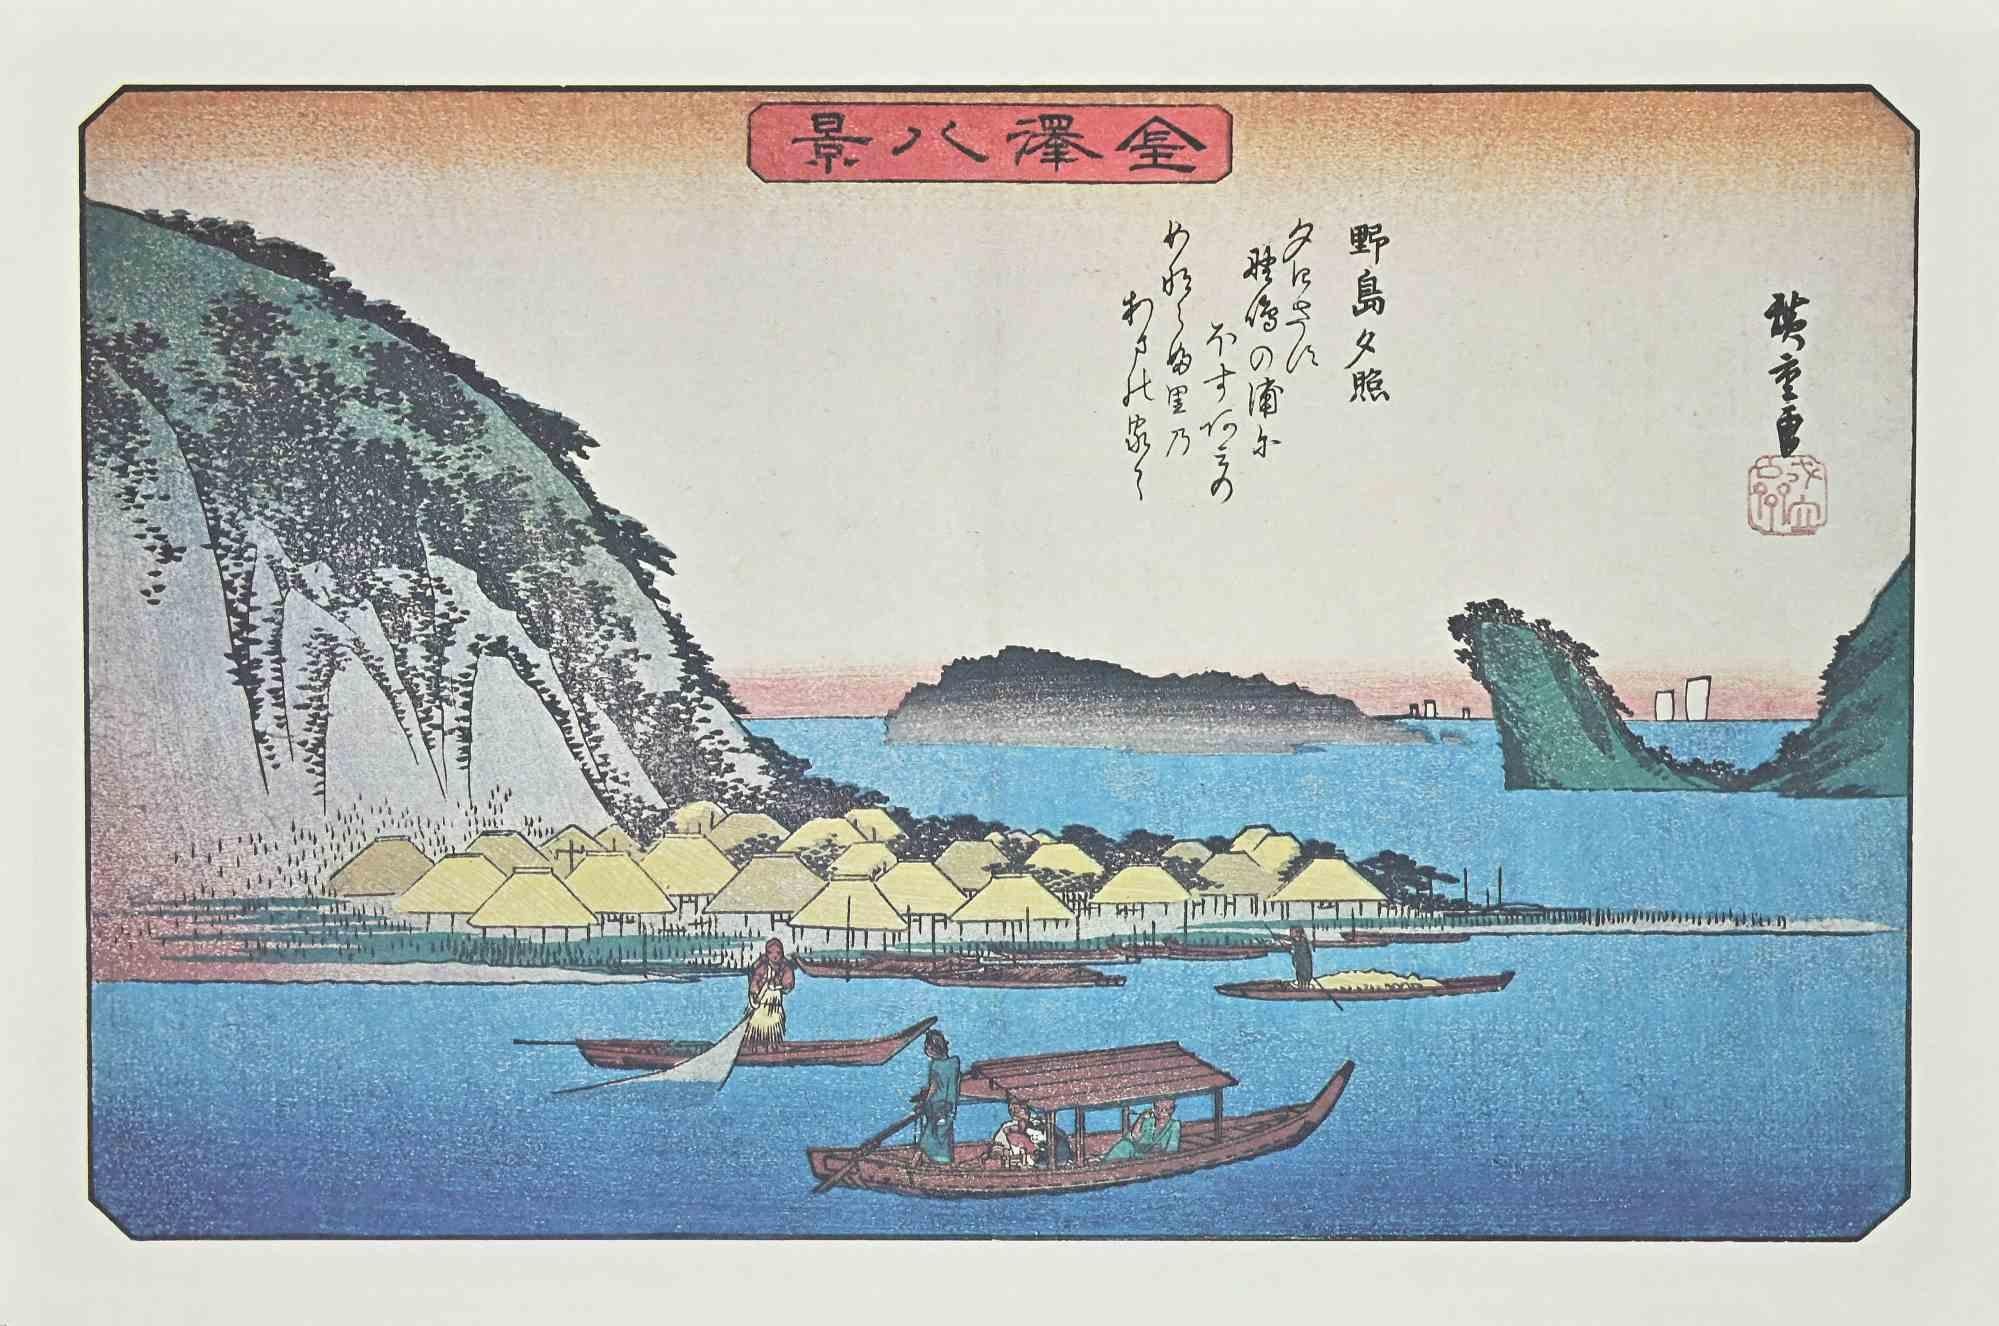 Eight Scenic Spots in Kanazawa is a modern artwork realized in the Mid-20th Century.

Mixed colored lithograph after a woodcut realized by the great Japanese artist Utagawa Hiroshige in the 19th century.

Very Good conditions.

Utagawa Hiroshige,